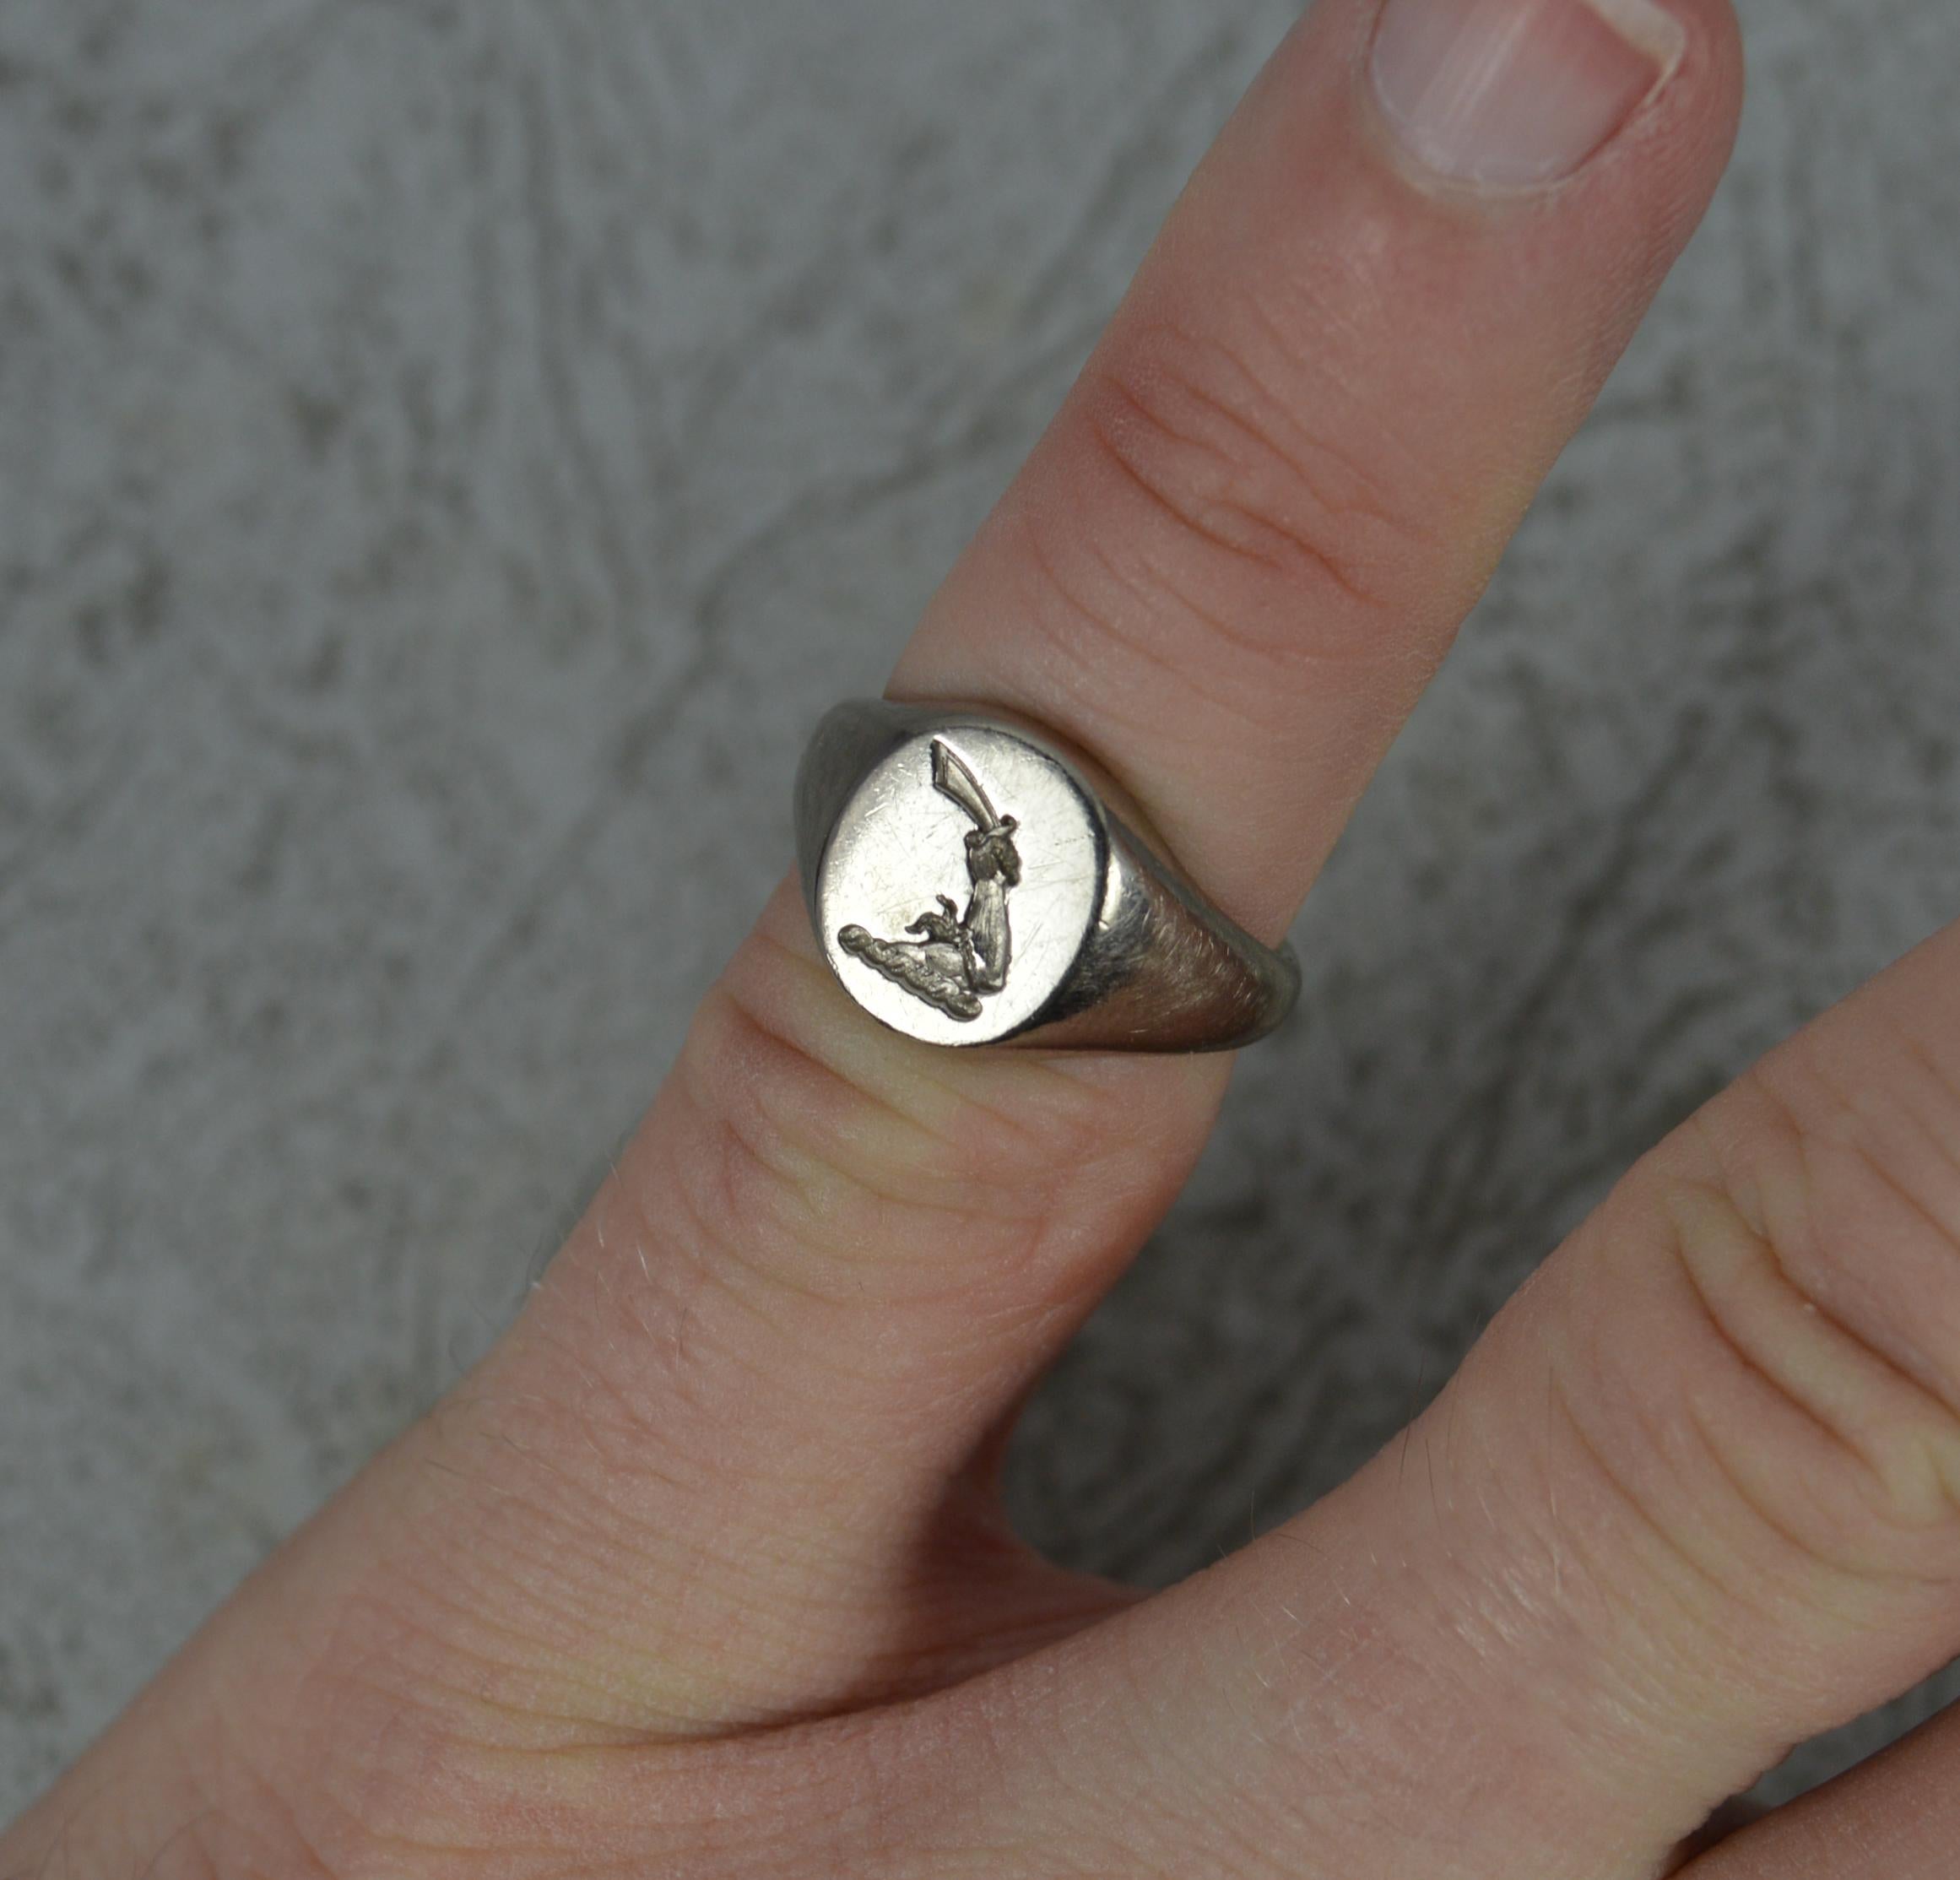 A superb contemporary signet ring.
Solid 18 carat white gold example.
10.3mm x 8.5mm oval shaped signet with a deeply carved intaglio seal of an armoured hand holding a sword or dagger.

CONDITION ; Very good. Clean and solid band. Crisp intaglio.